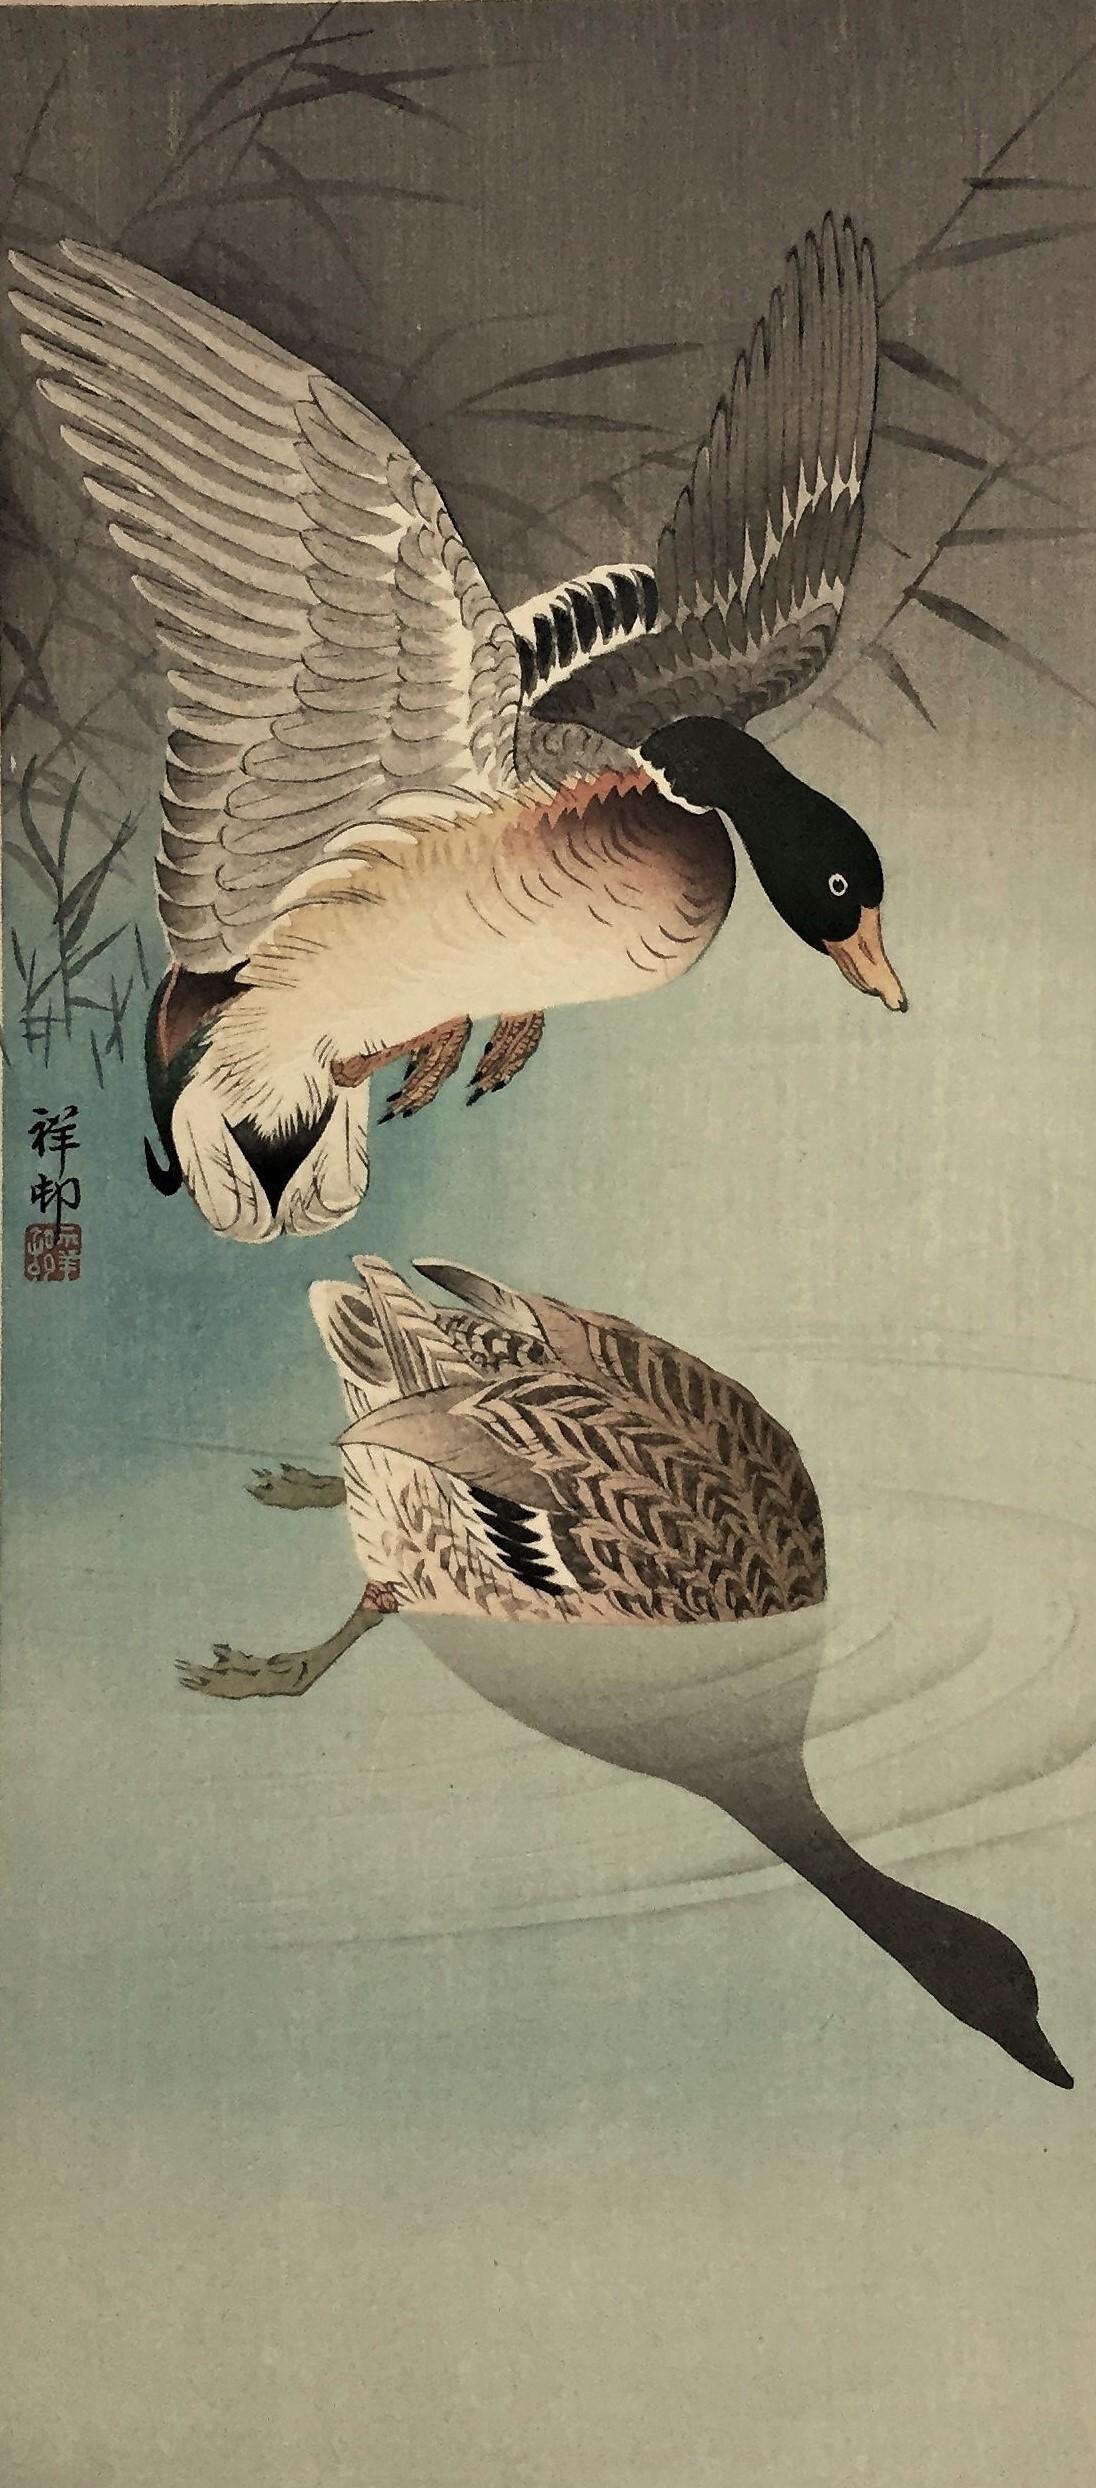 Two Wild Ducks in Flight Above Reeds, a Full Moon Behind. - Showa Print by Ohara Koson